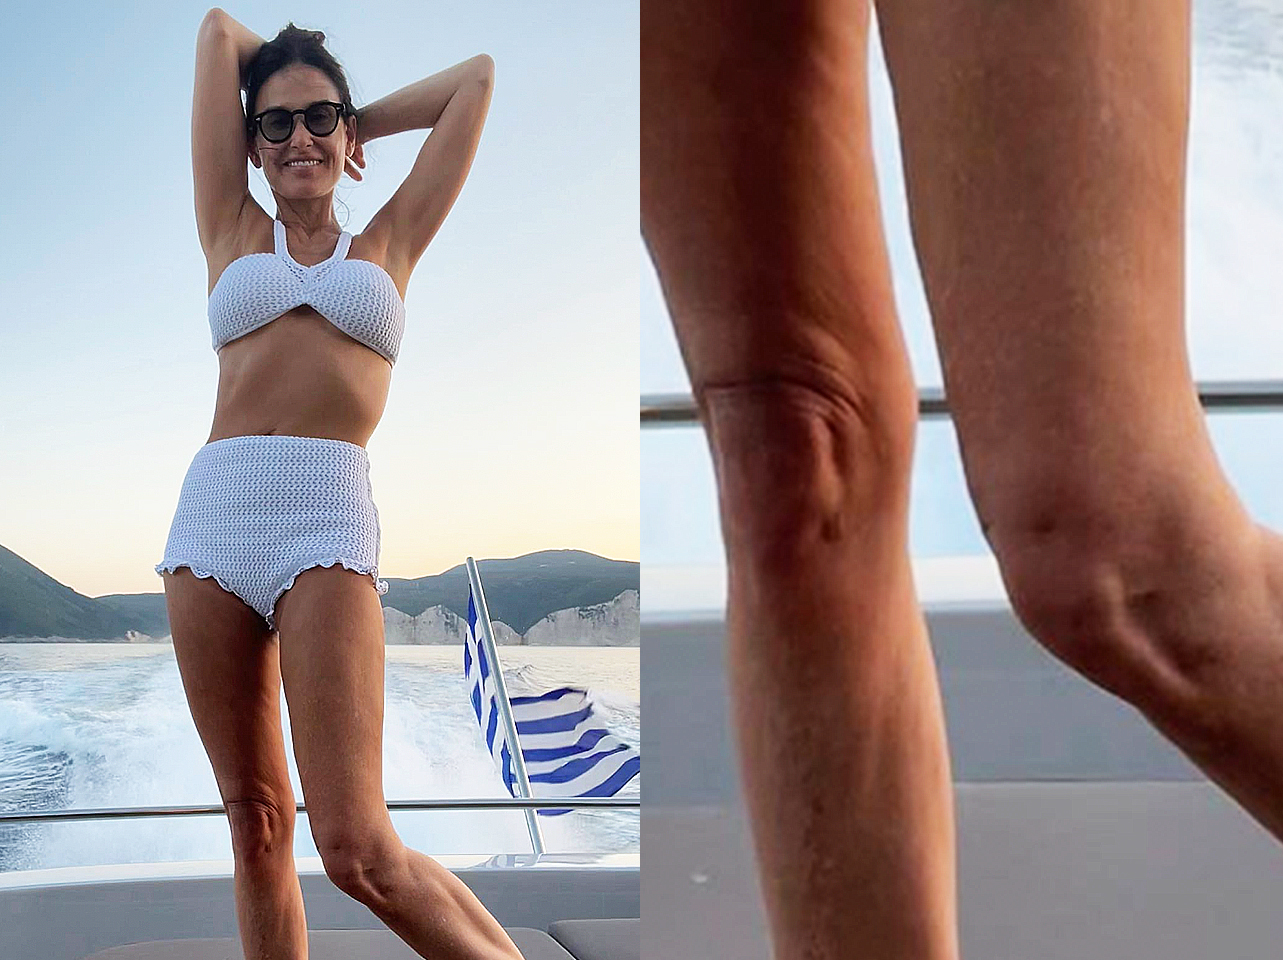 Demi Moore poses on a Yacht, dated September 2022 | Source: Instagram/DemiMoore